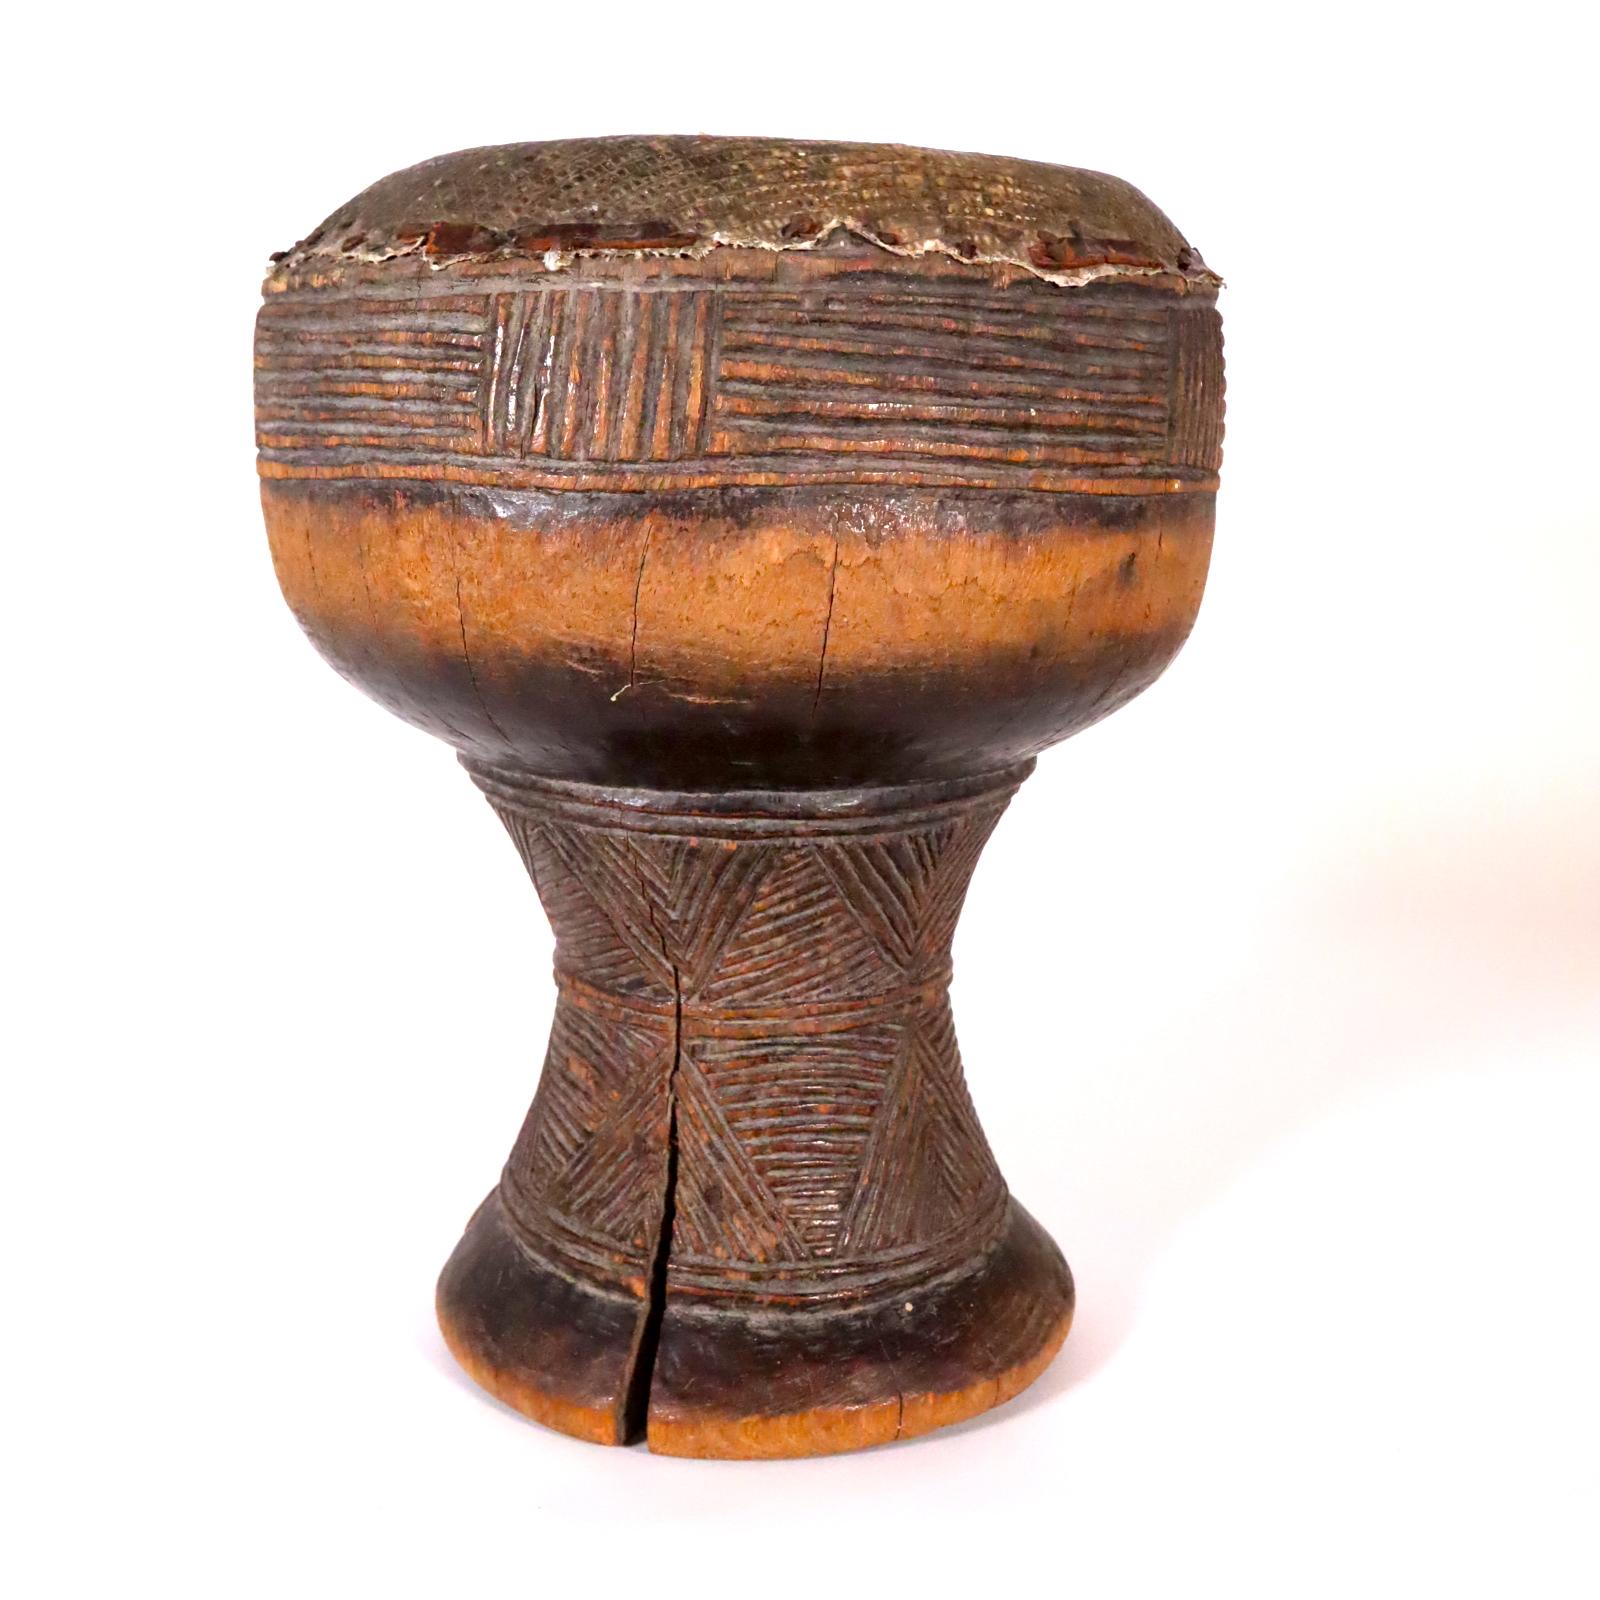 A fine old drum from the Kuba kingdom, possibly Lele or Kuba People, Democratic Republic of Congo, Central Africa. Probably created in the early to middle part of the 20th century. Wood with reptile skin drum head. The hourglass shape with nicely